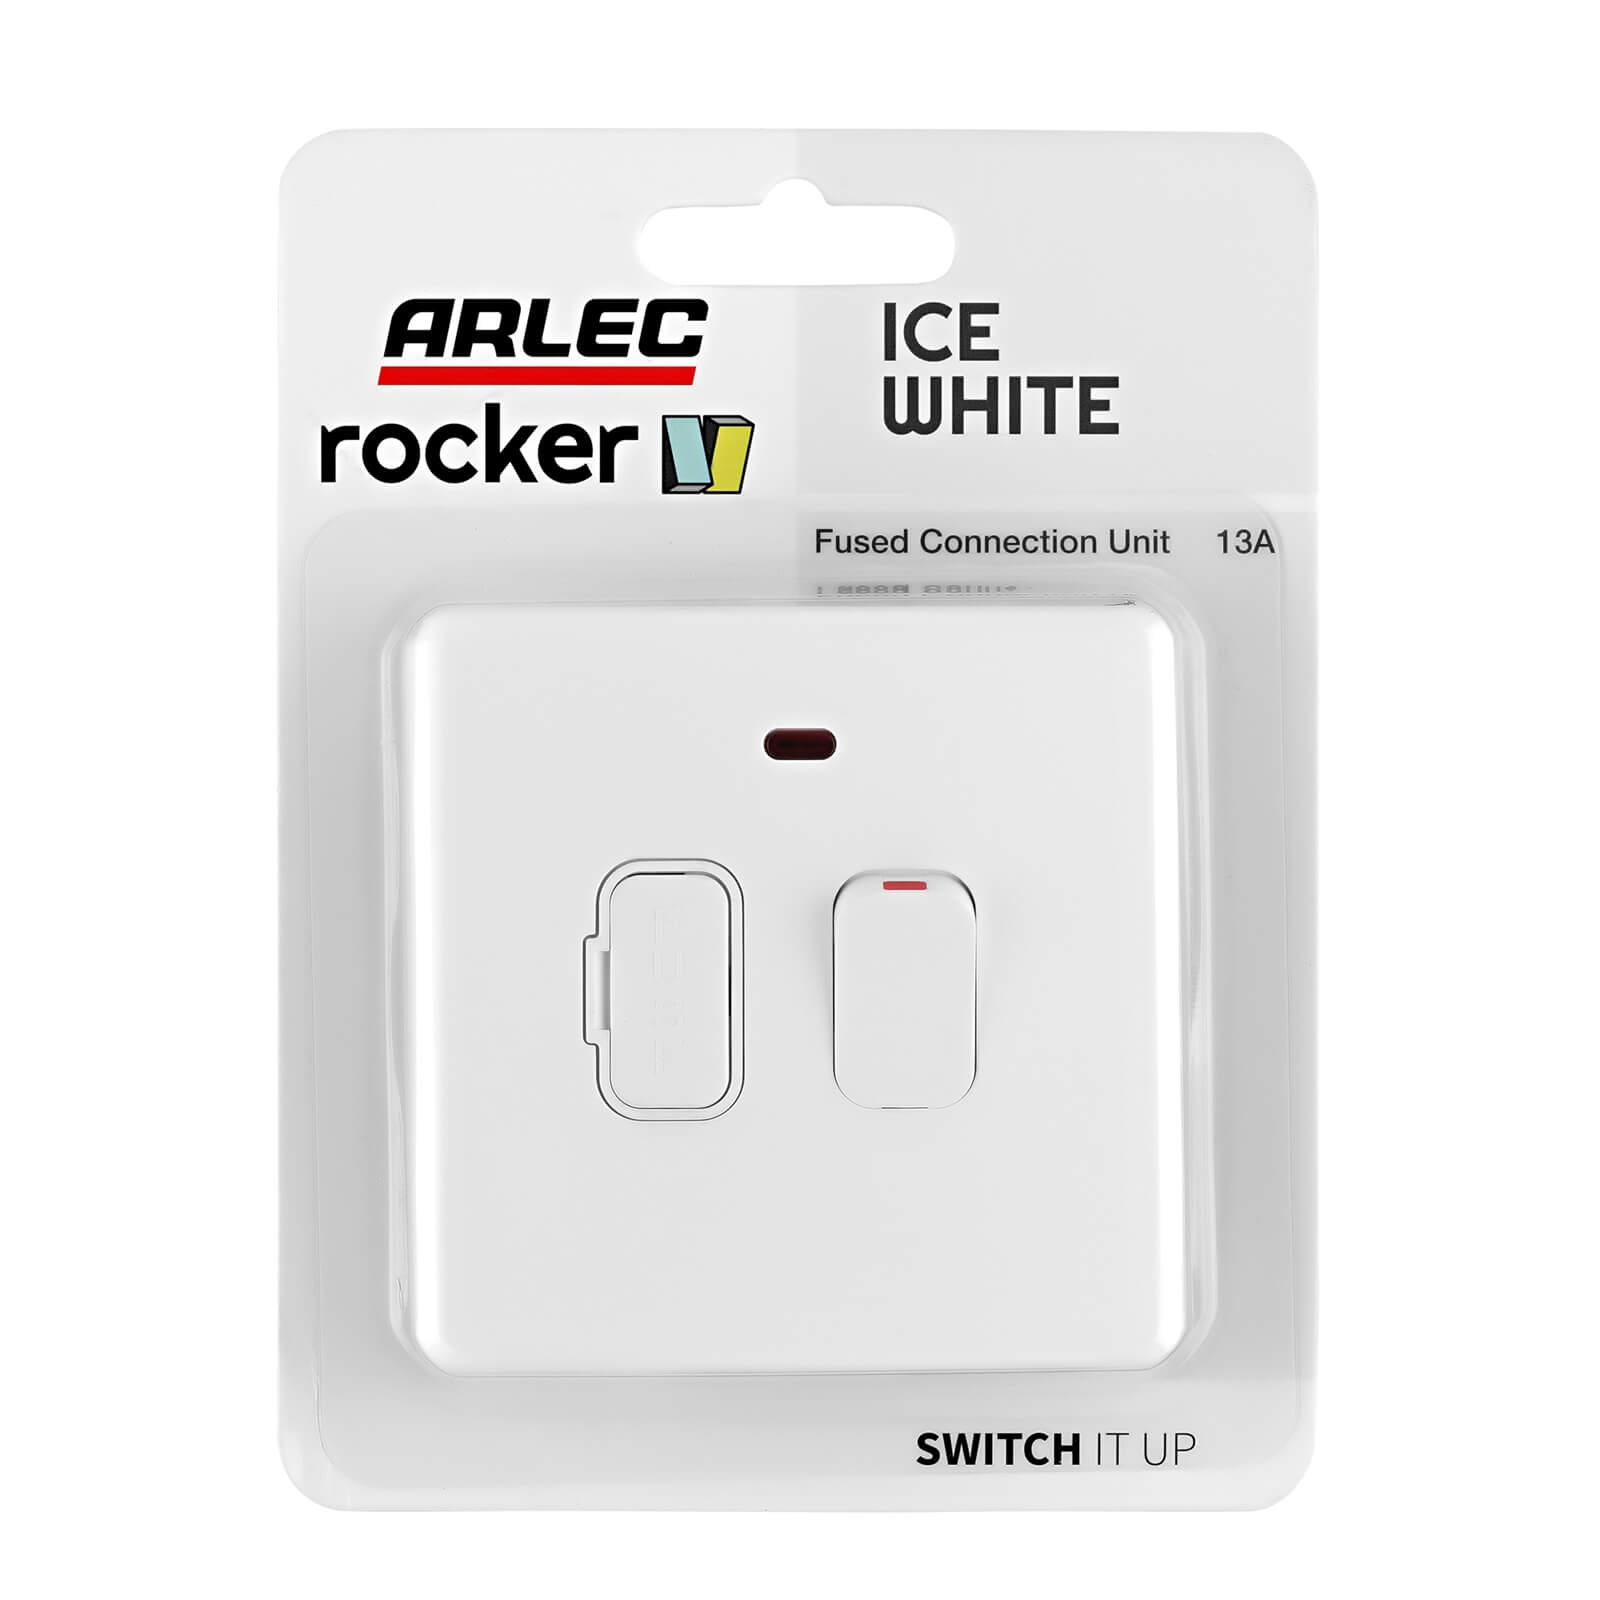 Arlec Rocker  13A Ice White Switched Fused connection unit